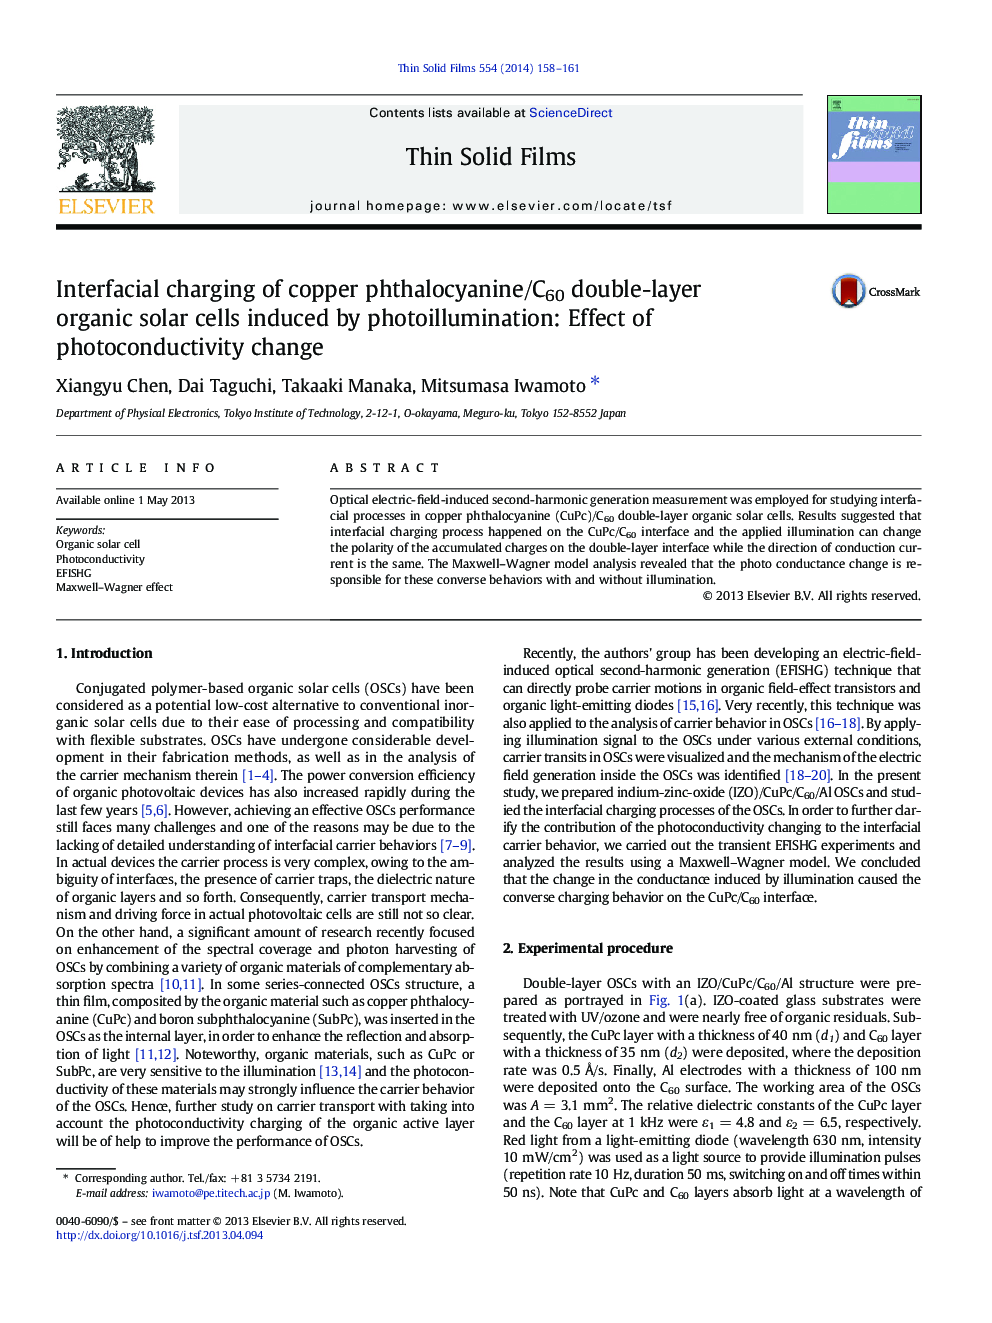 Interfacial charging of copper phthalocyanine/C60 double-layer organic solar cells induced by photoillumination: Effect of photoconductivity change